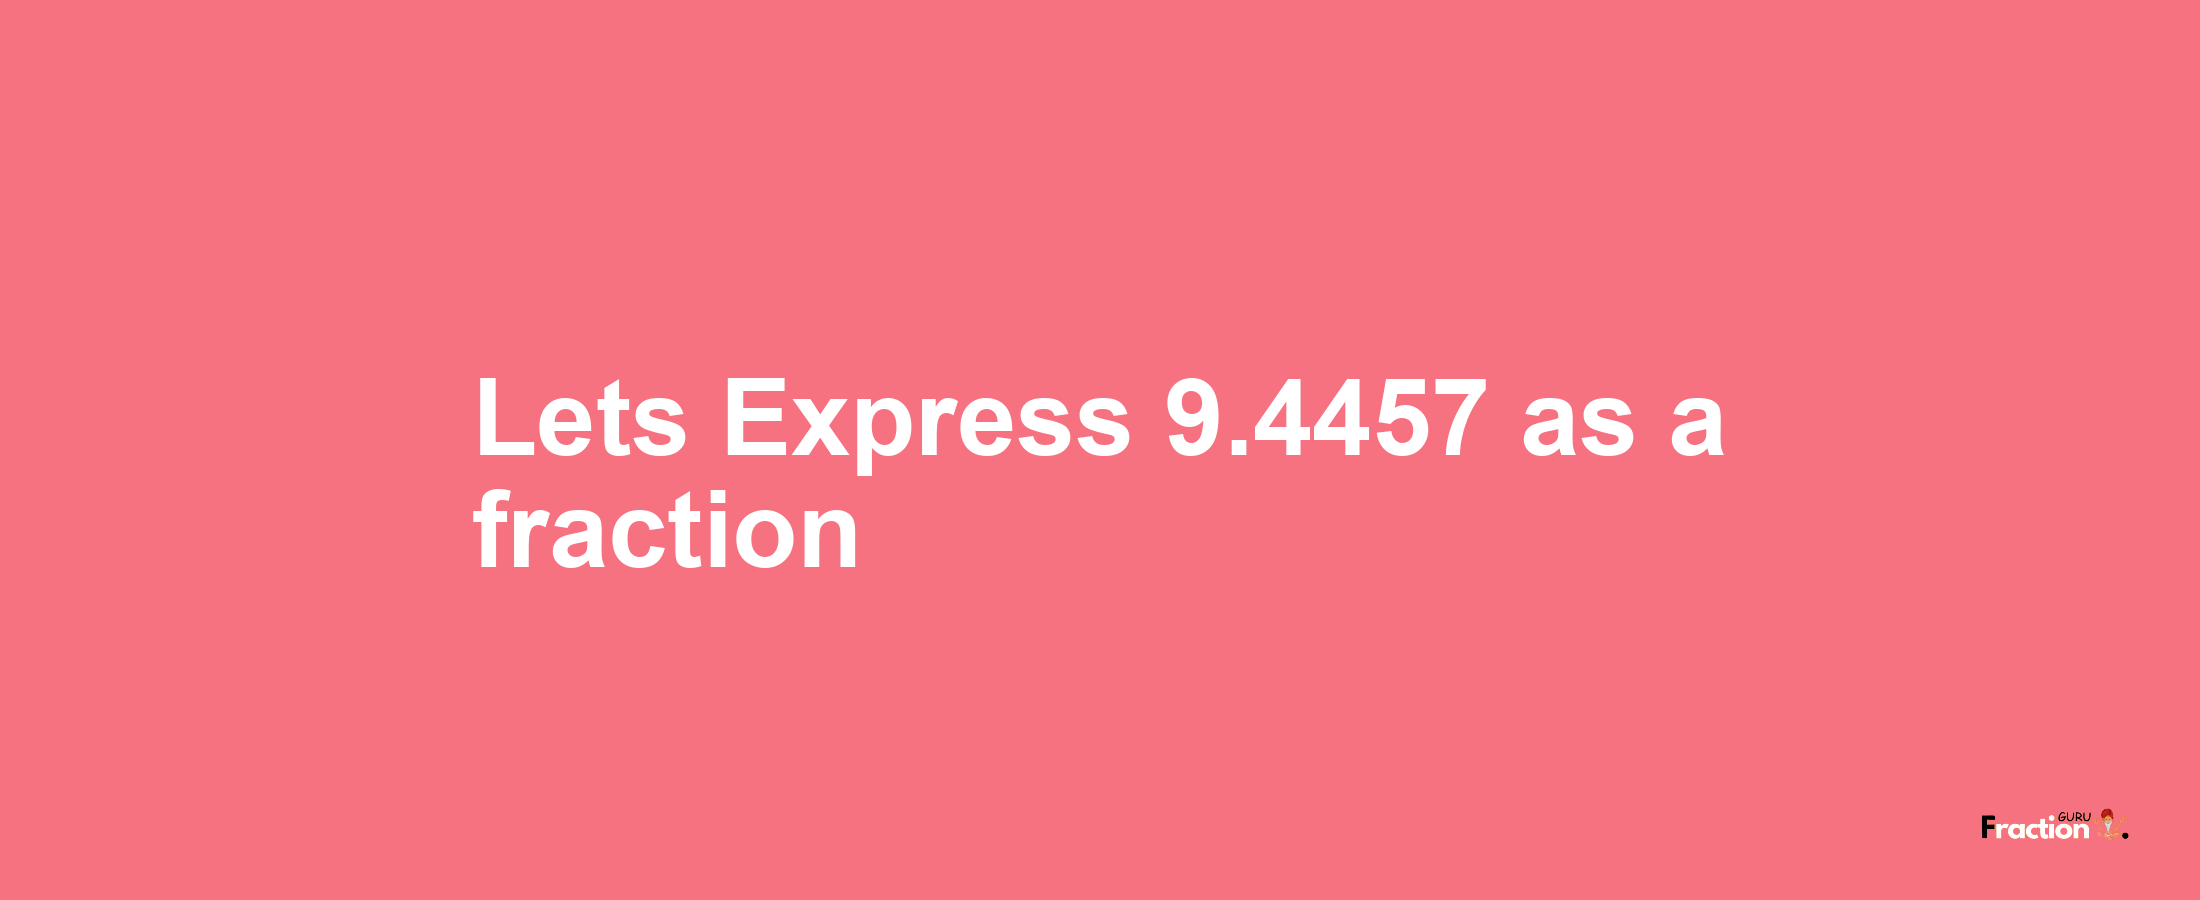 Lets Express 9.4457 as afraction